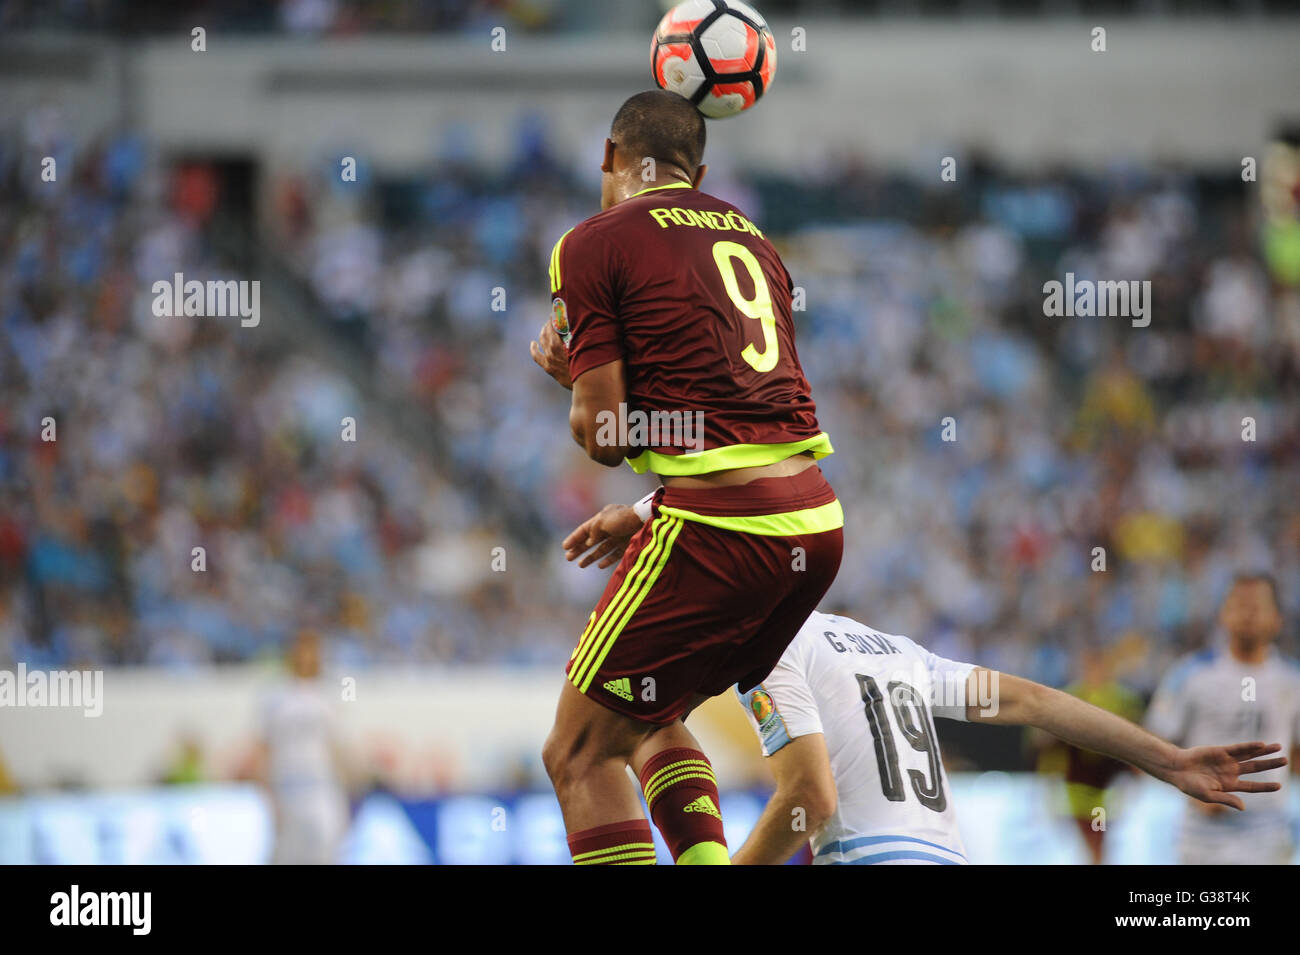 Philadelphia, Pennsylvania, USA. 9th June, 2016. SALMON RONDON (9) of Venezuela in action against Uruguay during the Copa America match held at Lincoln Financial Field in Philadelphia Pa Credit:  Ricky Fitchett/ZUMA Wire/Alamy Live News Stock Photo